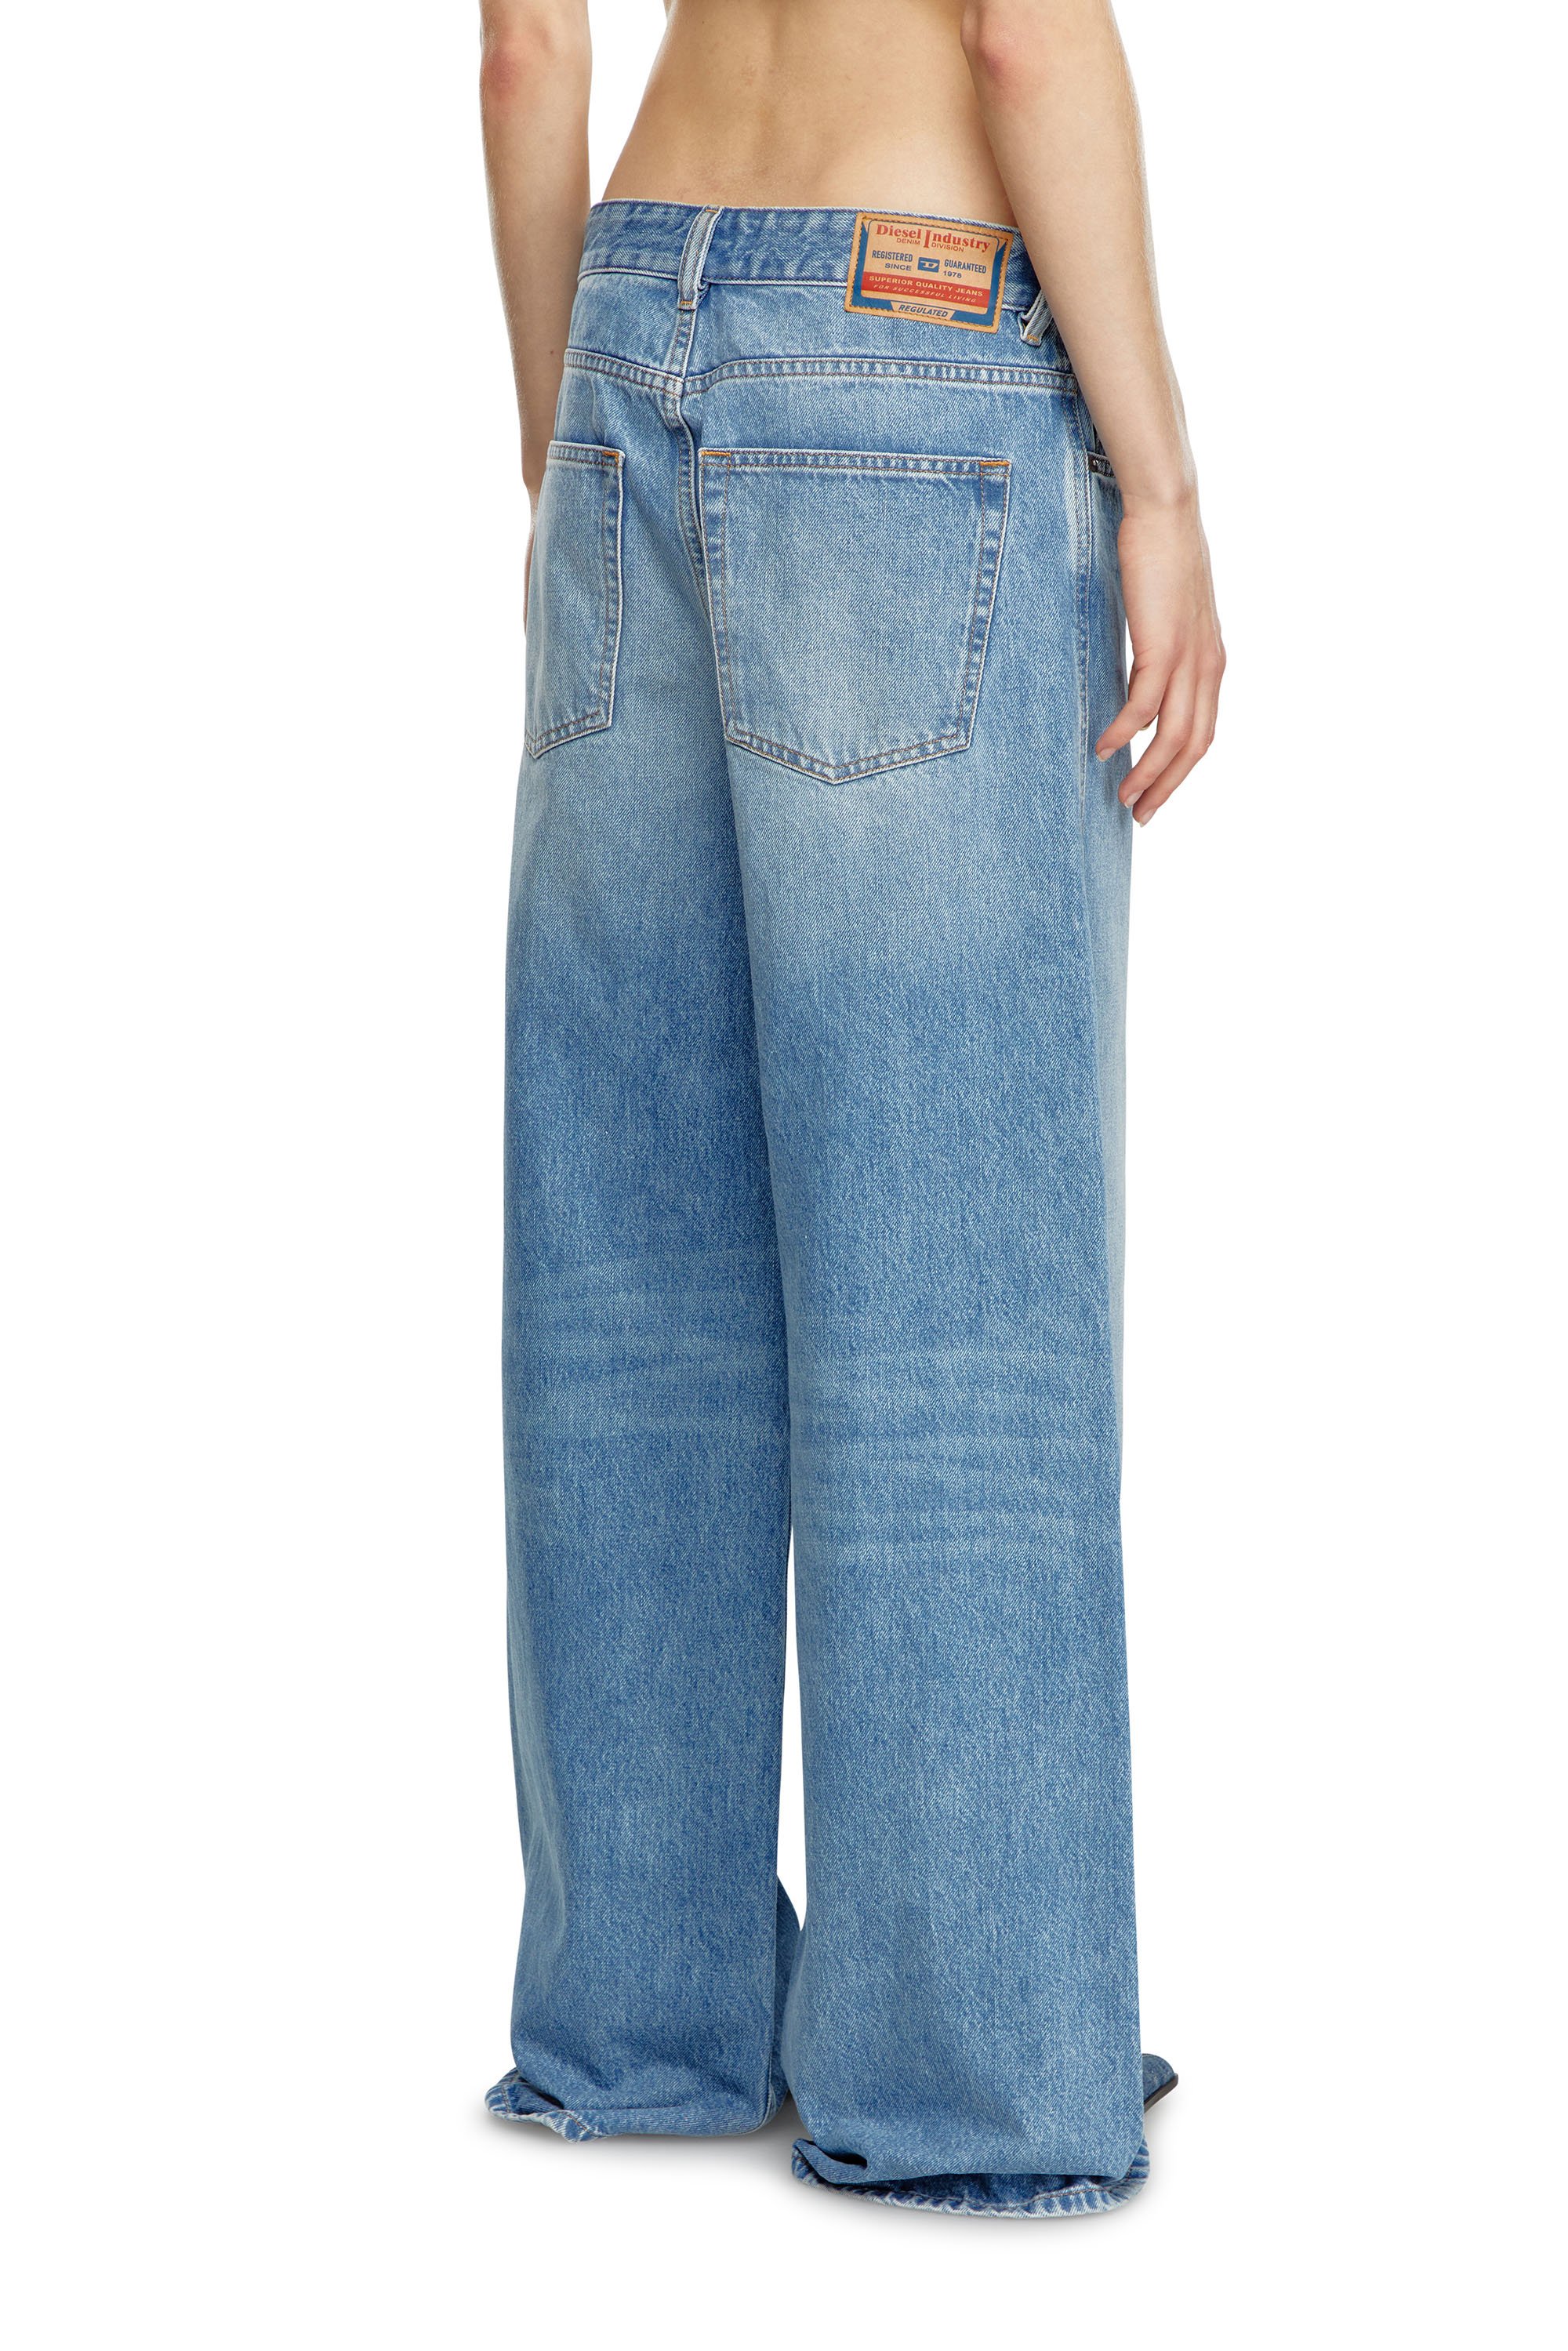 Diesel - Straight Jeans 1996 D-Sire 09I29, Mujer Straight Jeans - 1996 D-Sire in Azul marino - Image 3